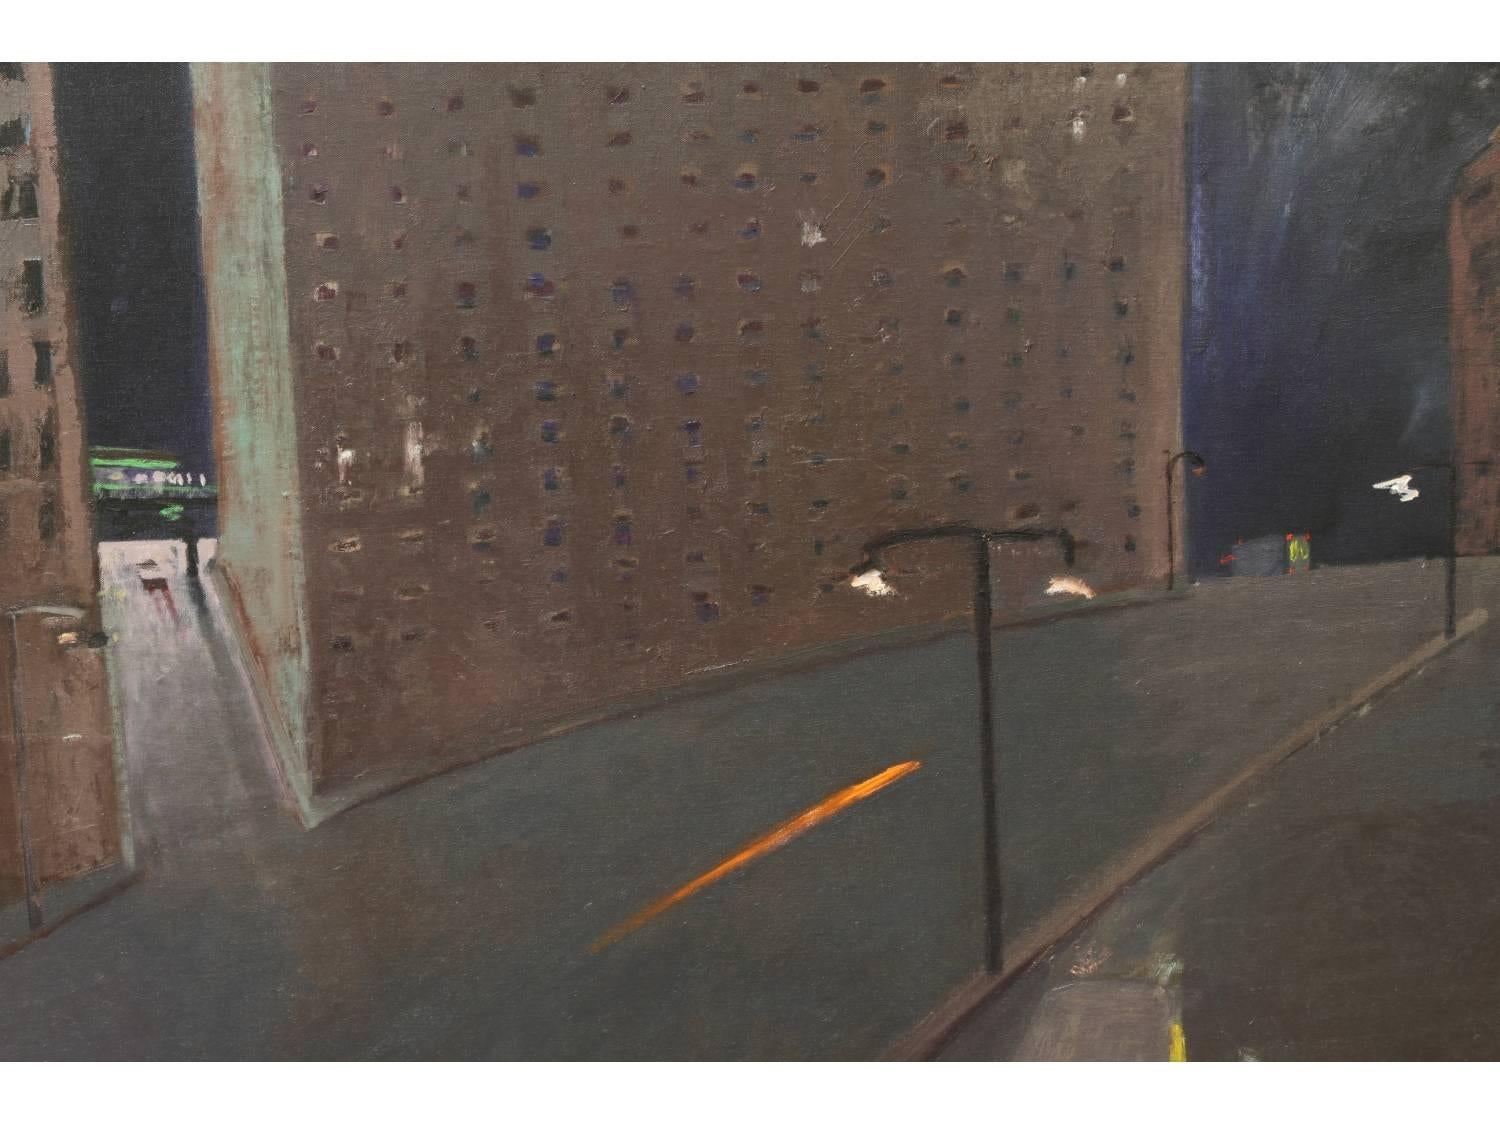 A large and powerful City Scape from Australia's Andrew Browne. A cityscape at night with high rises above streets illuminated with street lights and a streak of light, with a bus and a van outside a lit doorway. Signed A. Browne, '83 lower left.